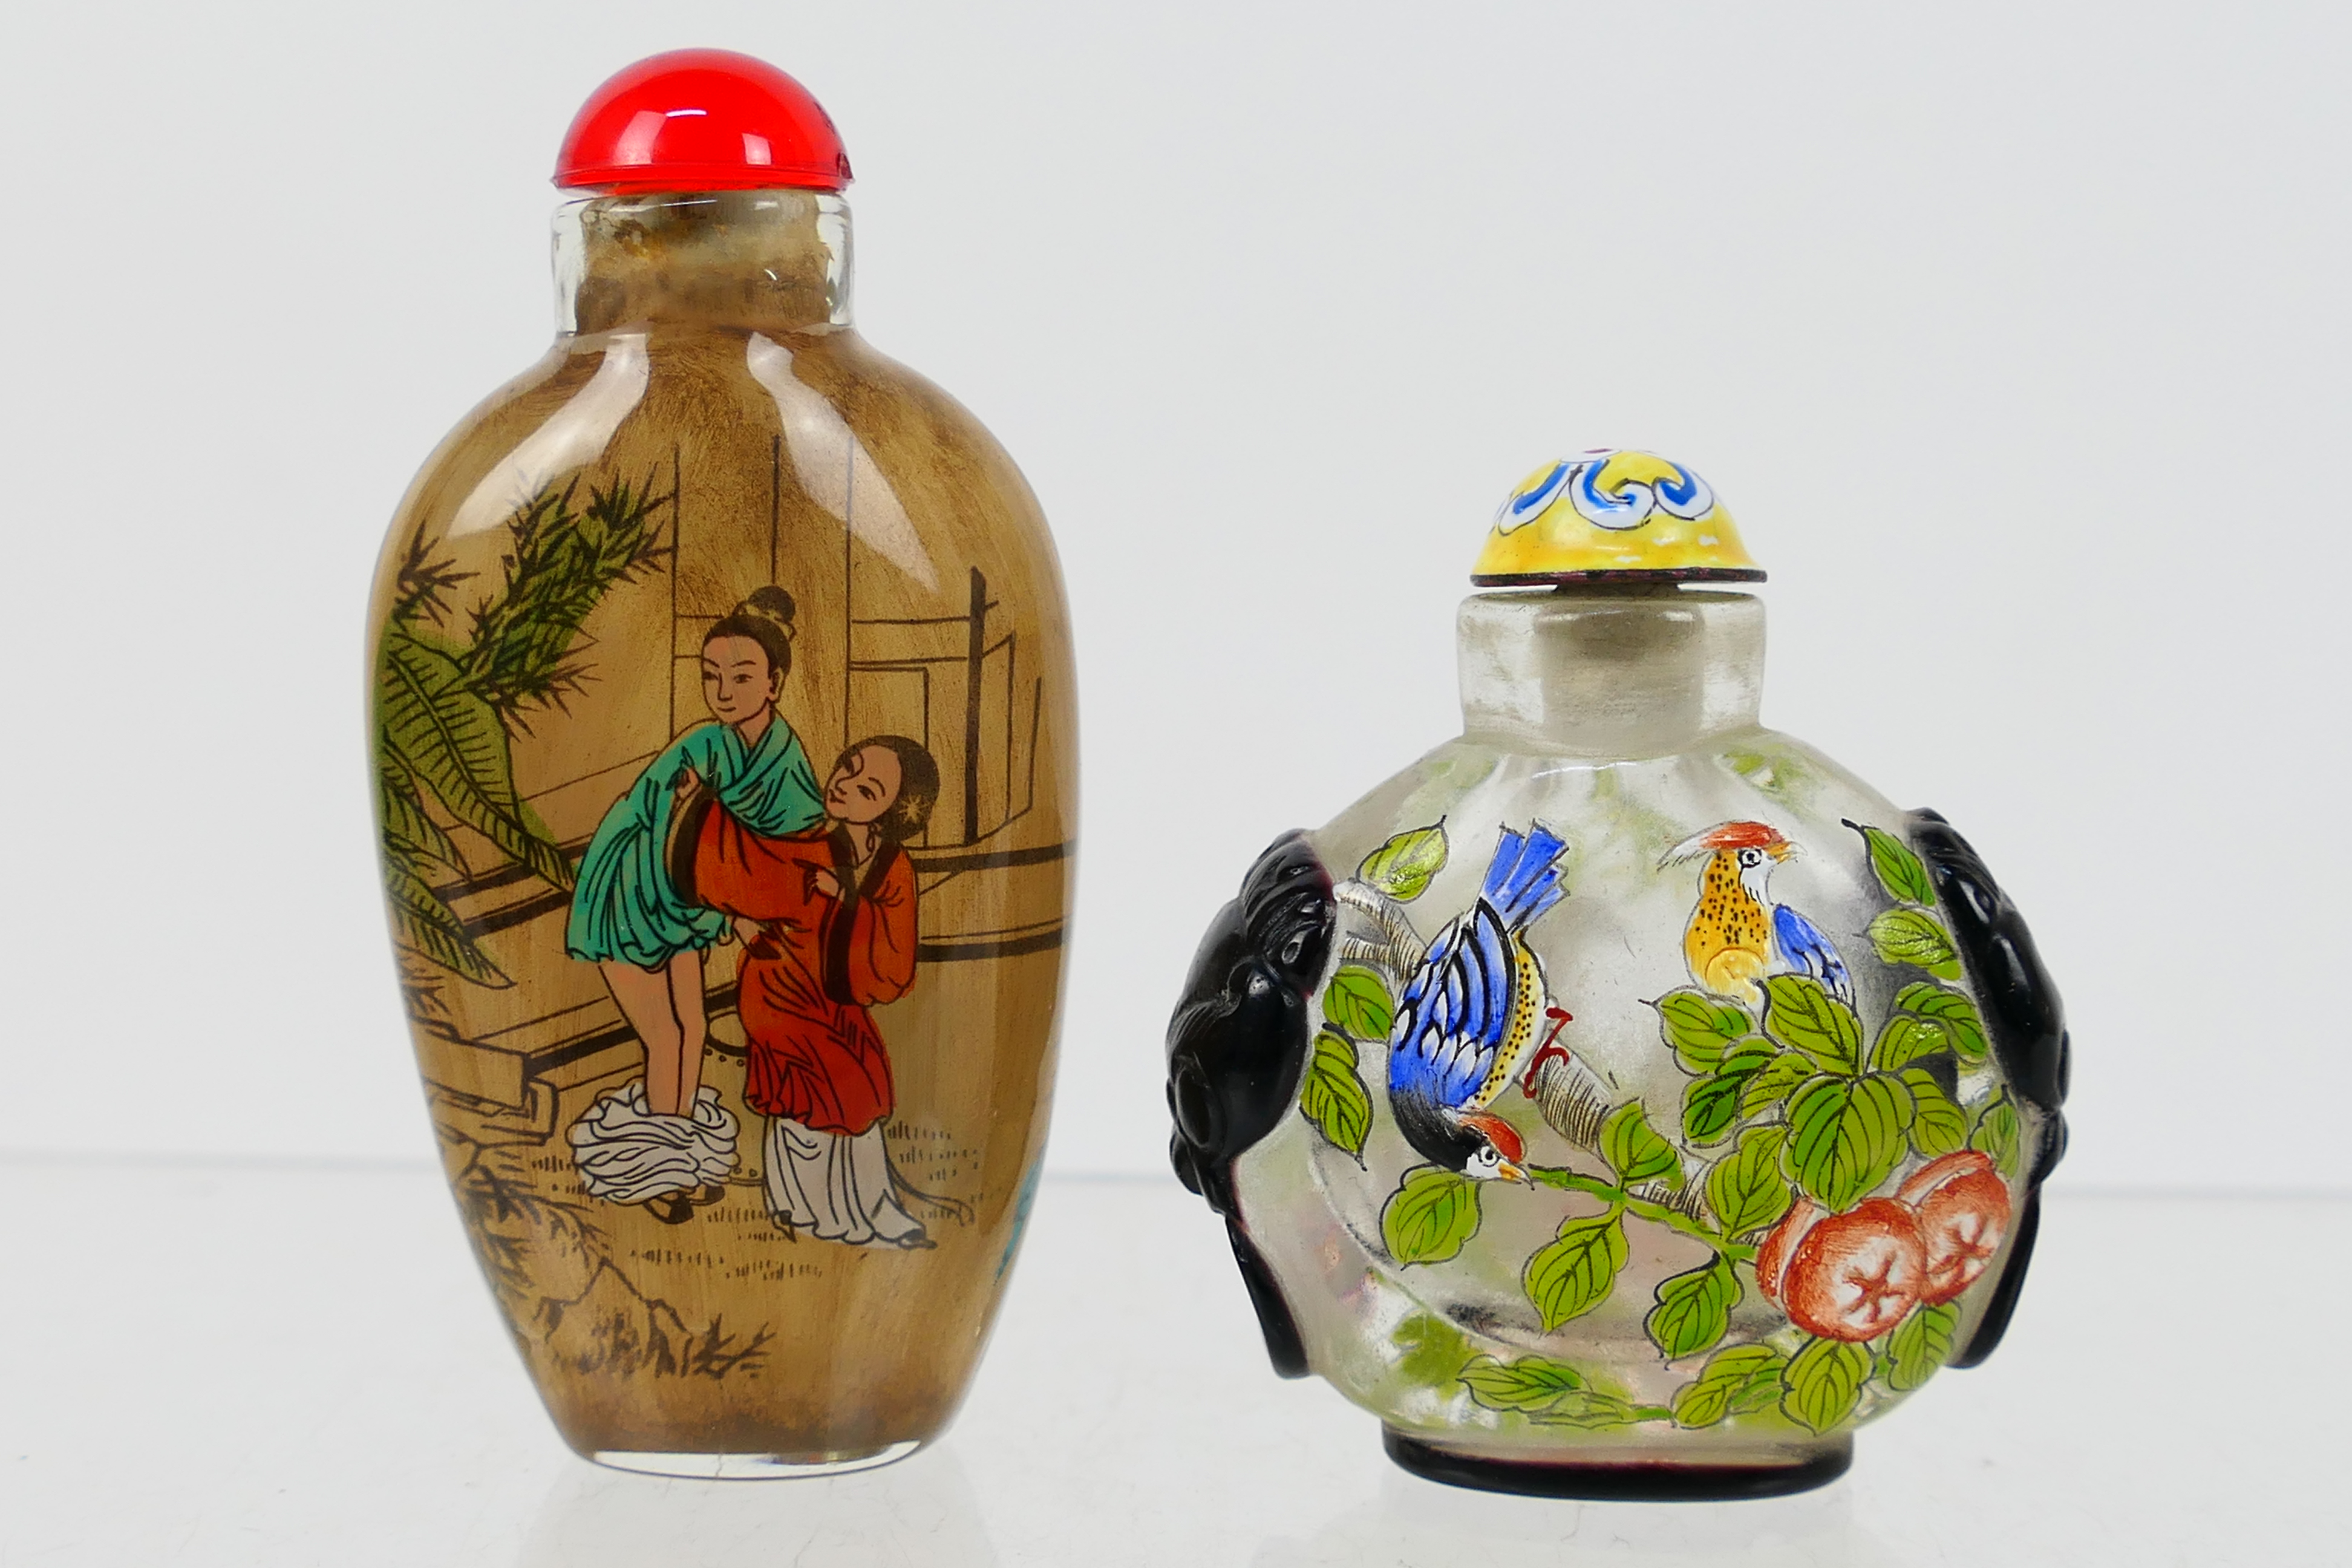 A collection of snuff bottles to include glass, ceramic and other. - Image 12 of 14